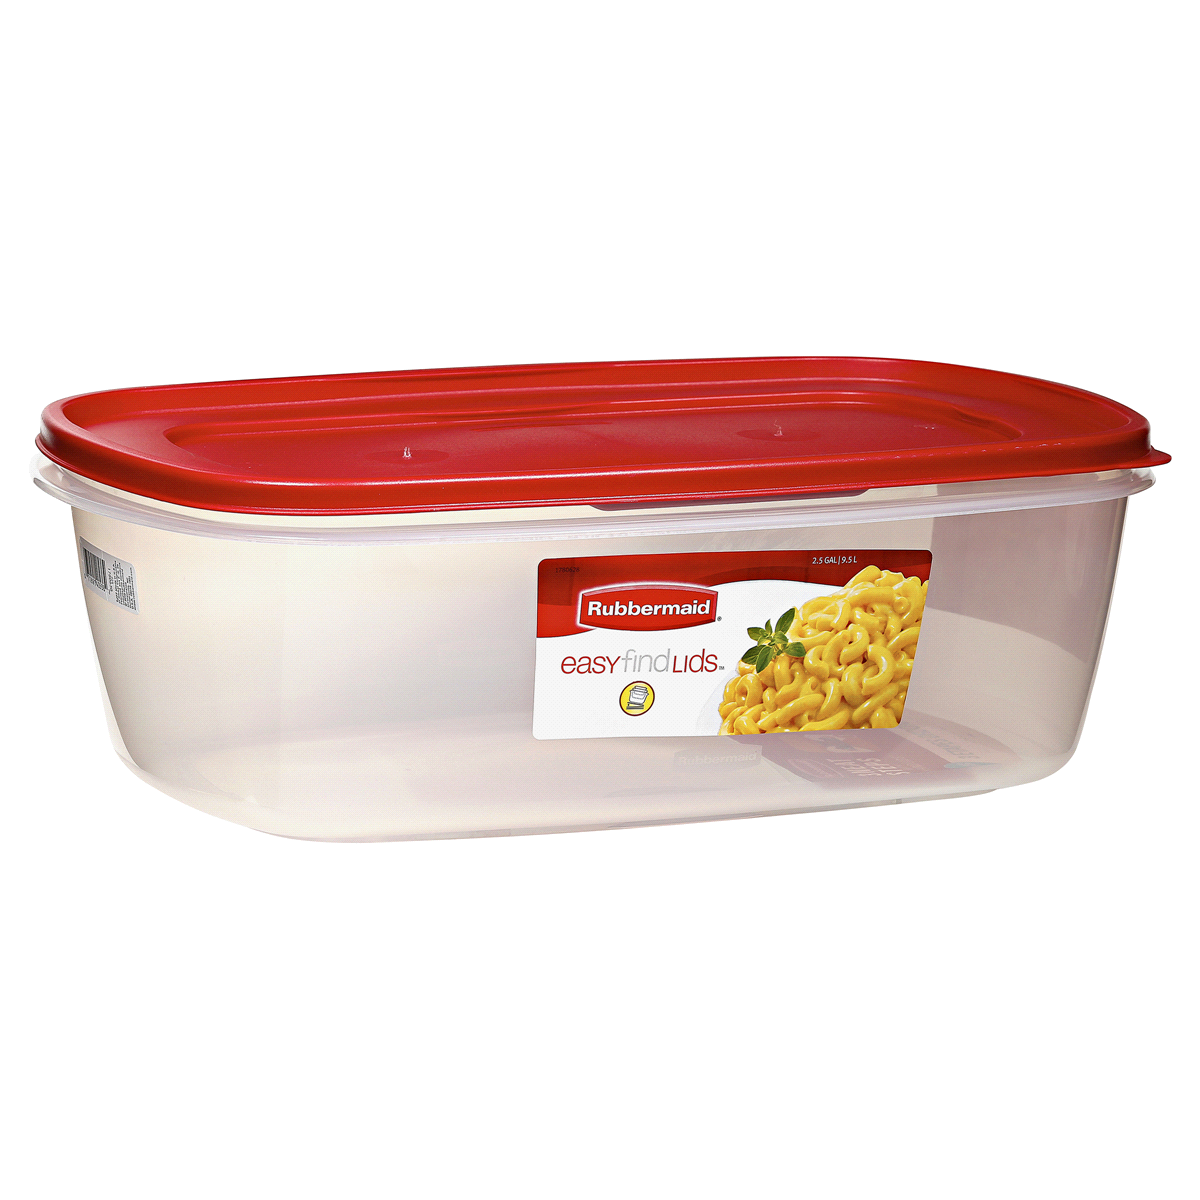 slide 2 of 5, Rubbermaid Easy Find Lids Rectangle Food Storage Container, 2.5 gal